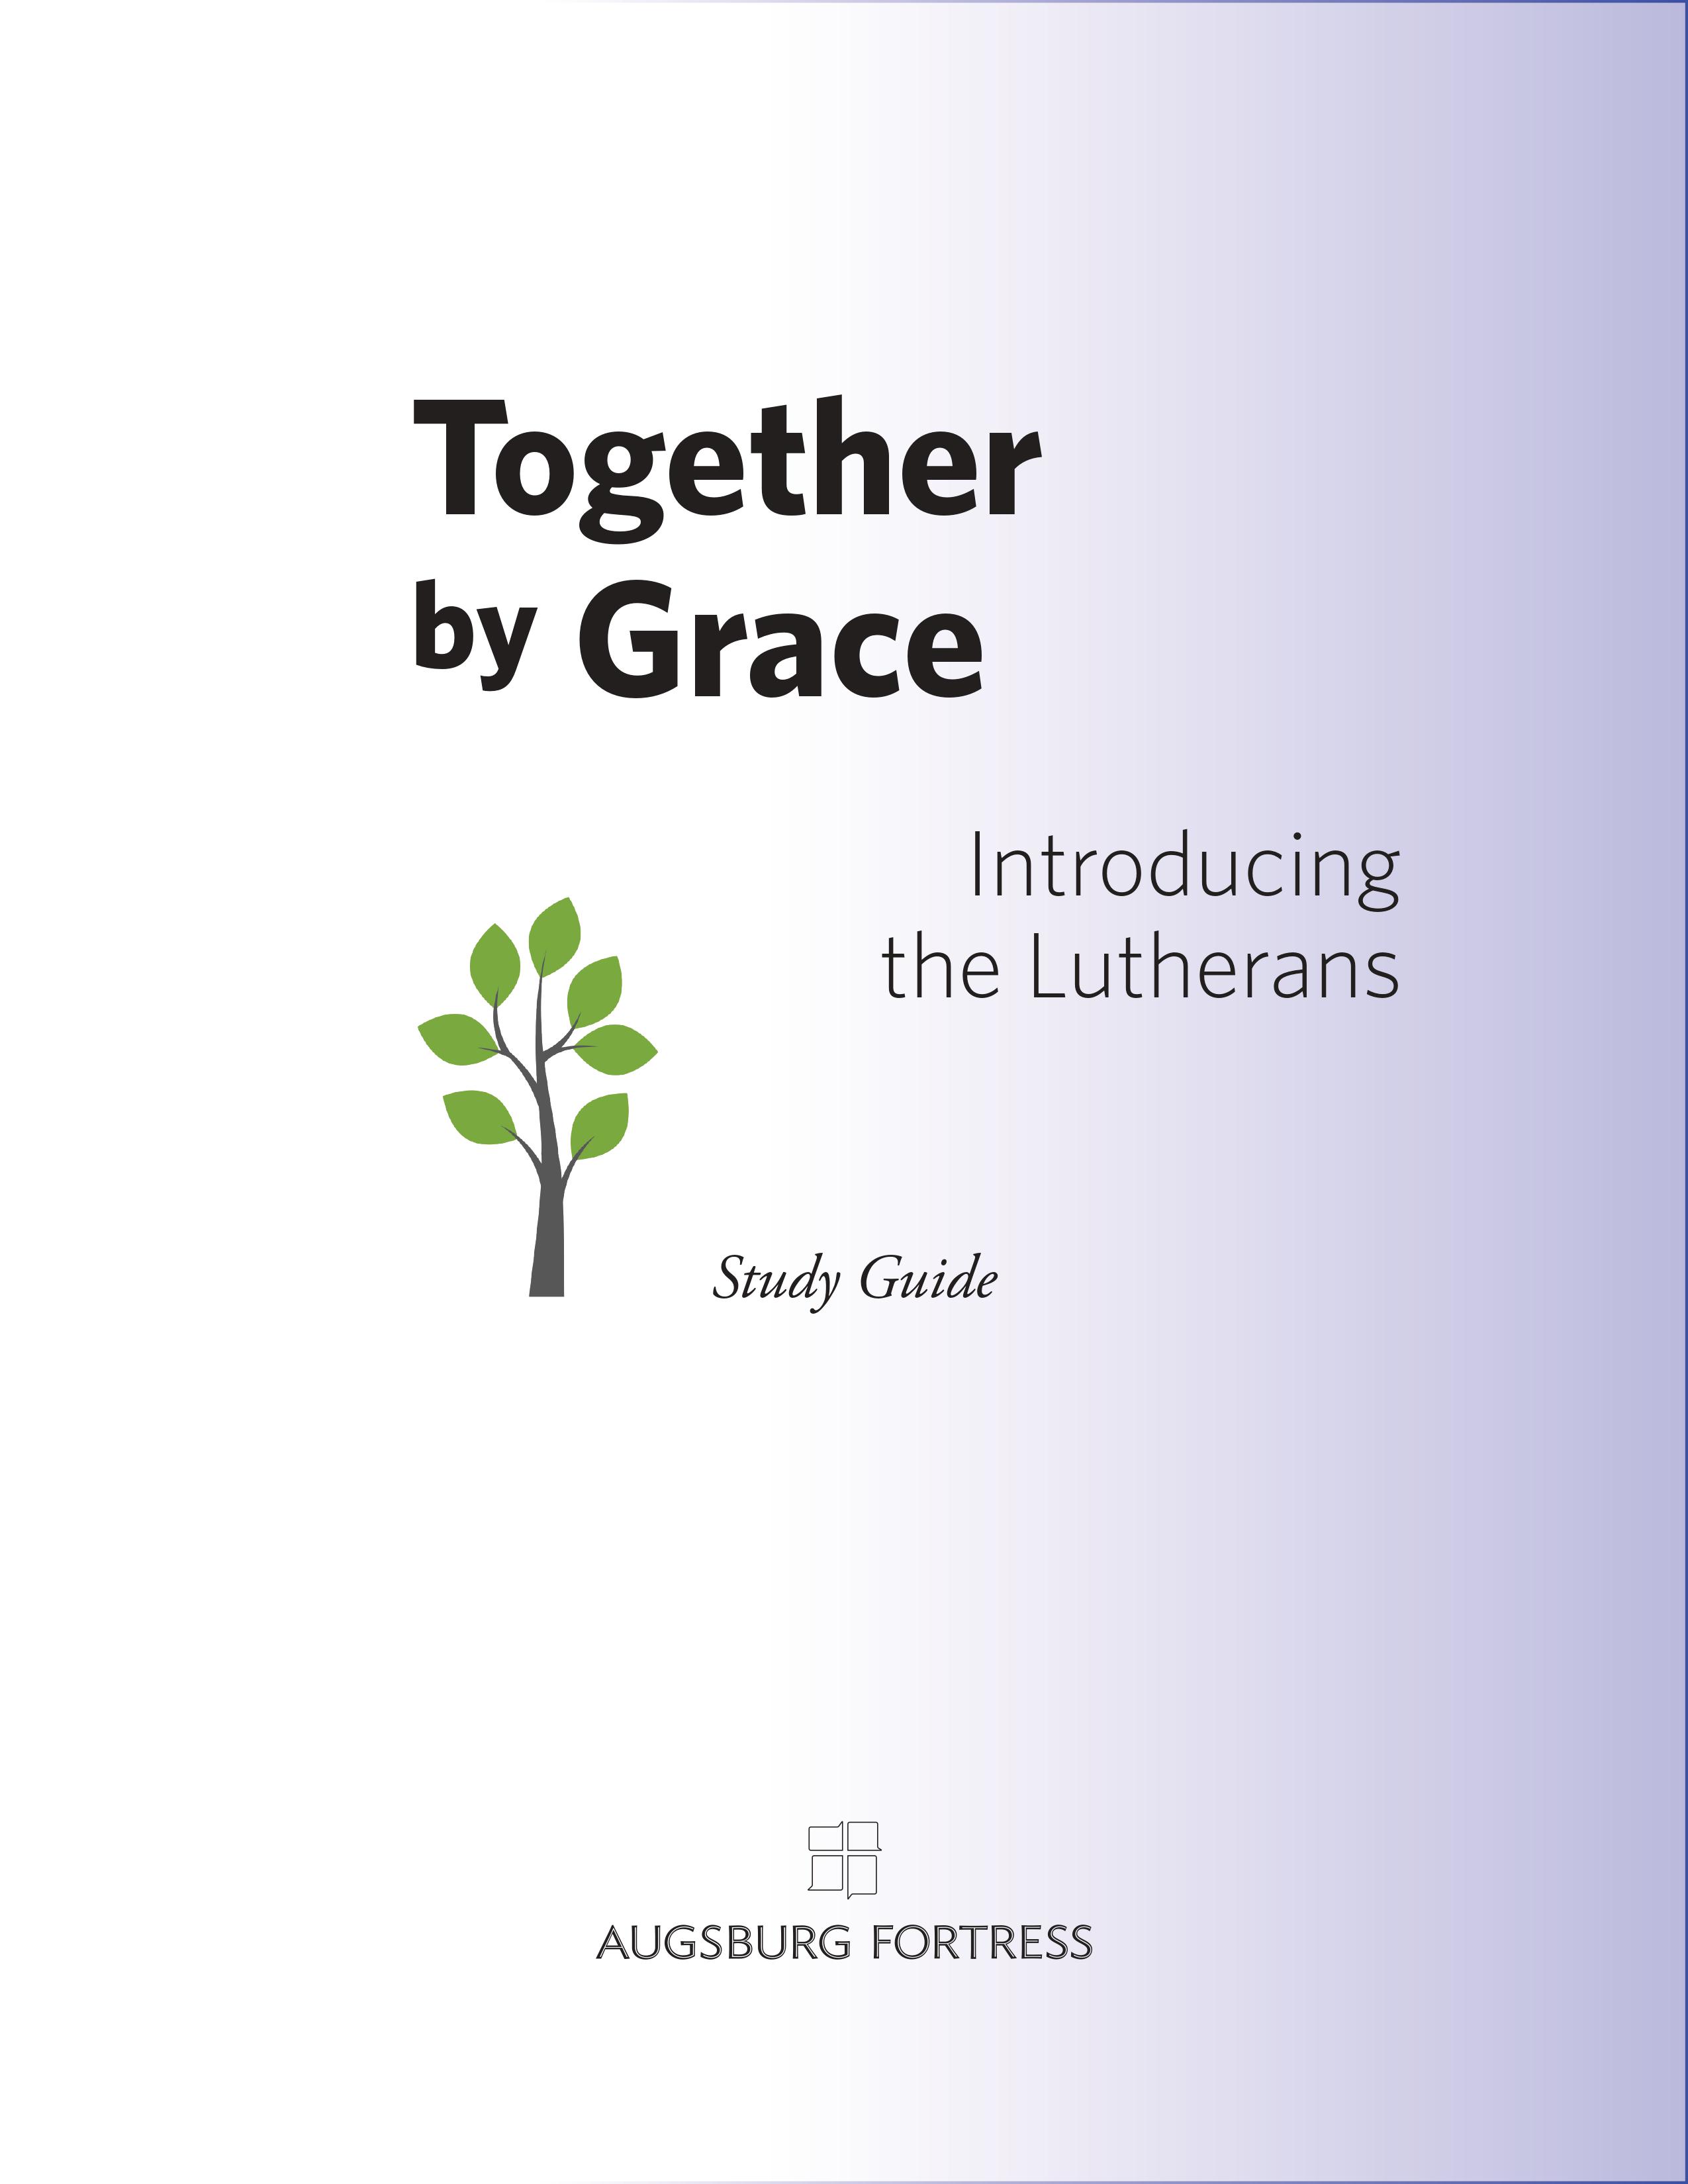 Together by Grace, Study Guide